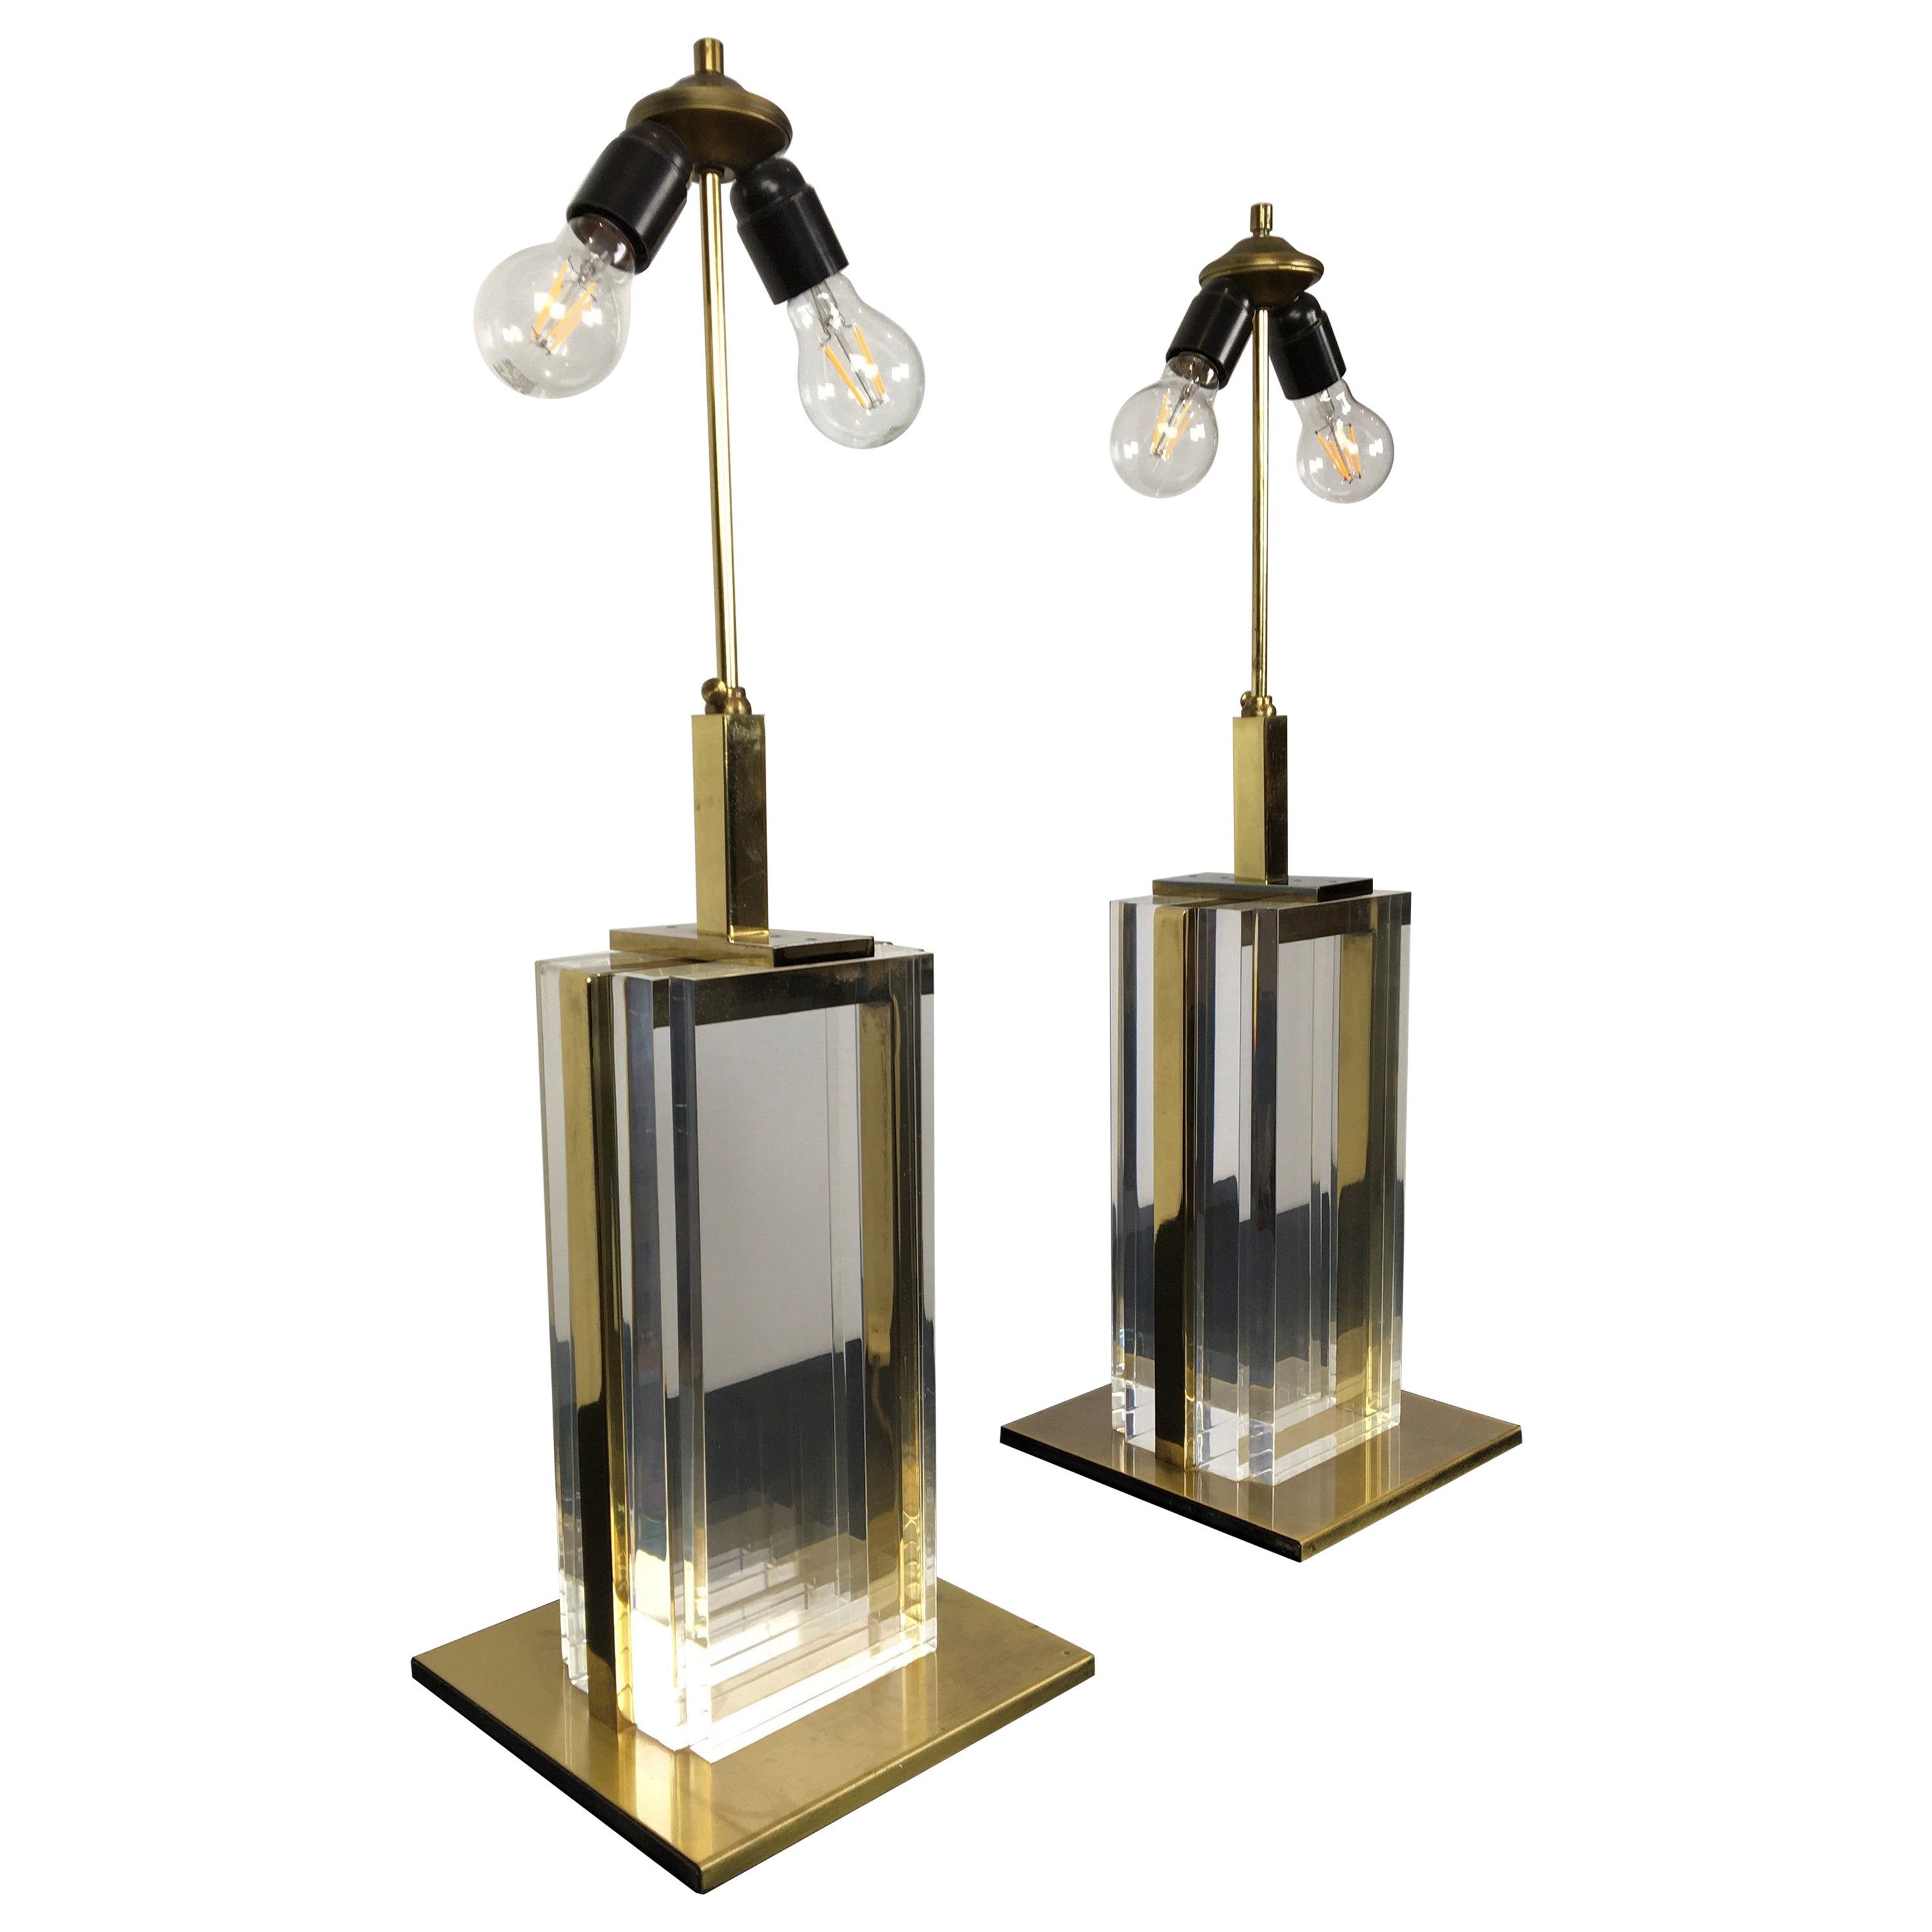 Pair of Belgo Chrome Table Lamps, Lucite and Brass, 1970s For Sale